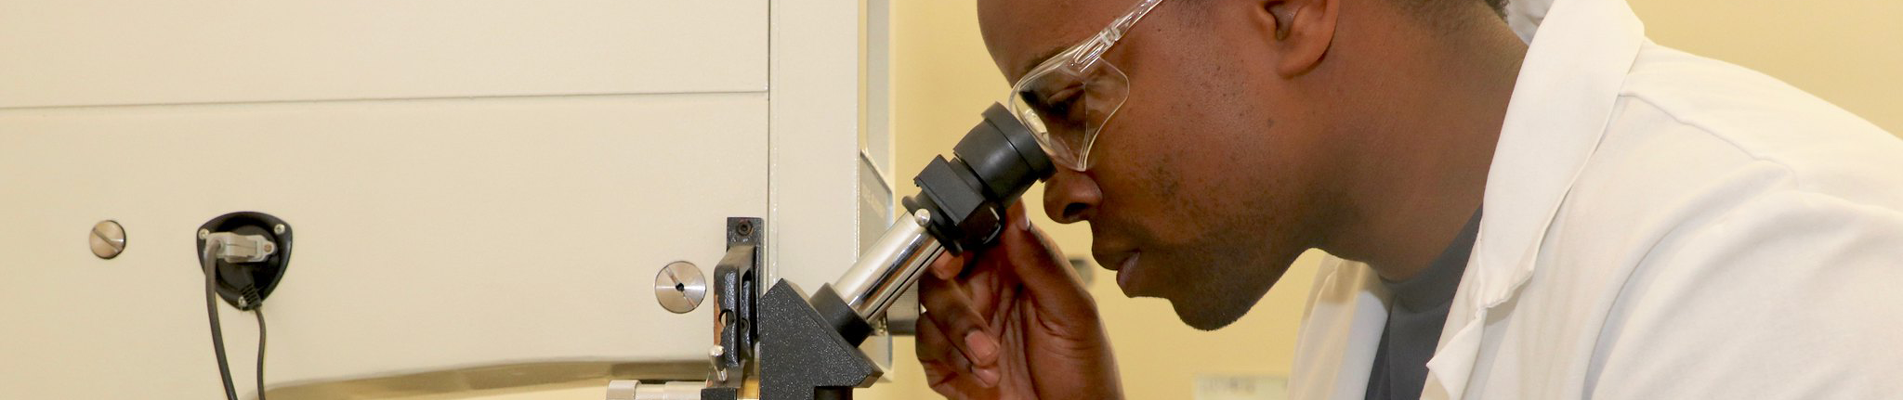 student looking through a microscope